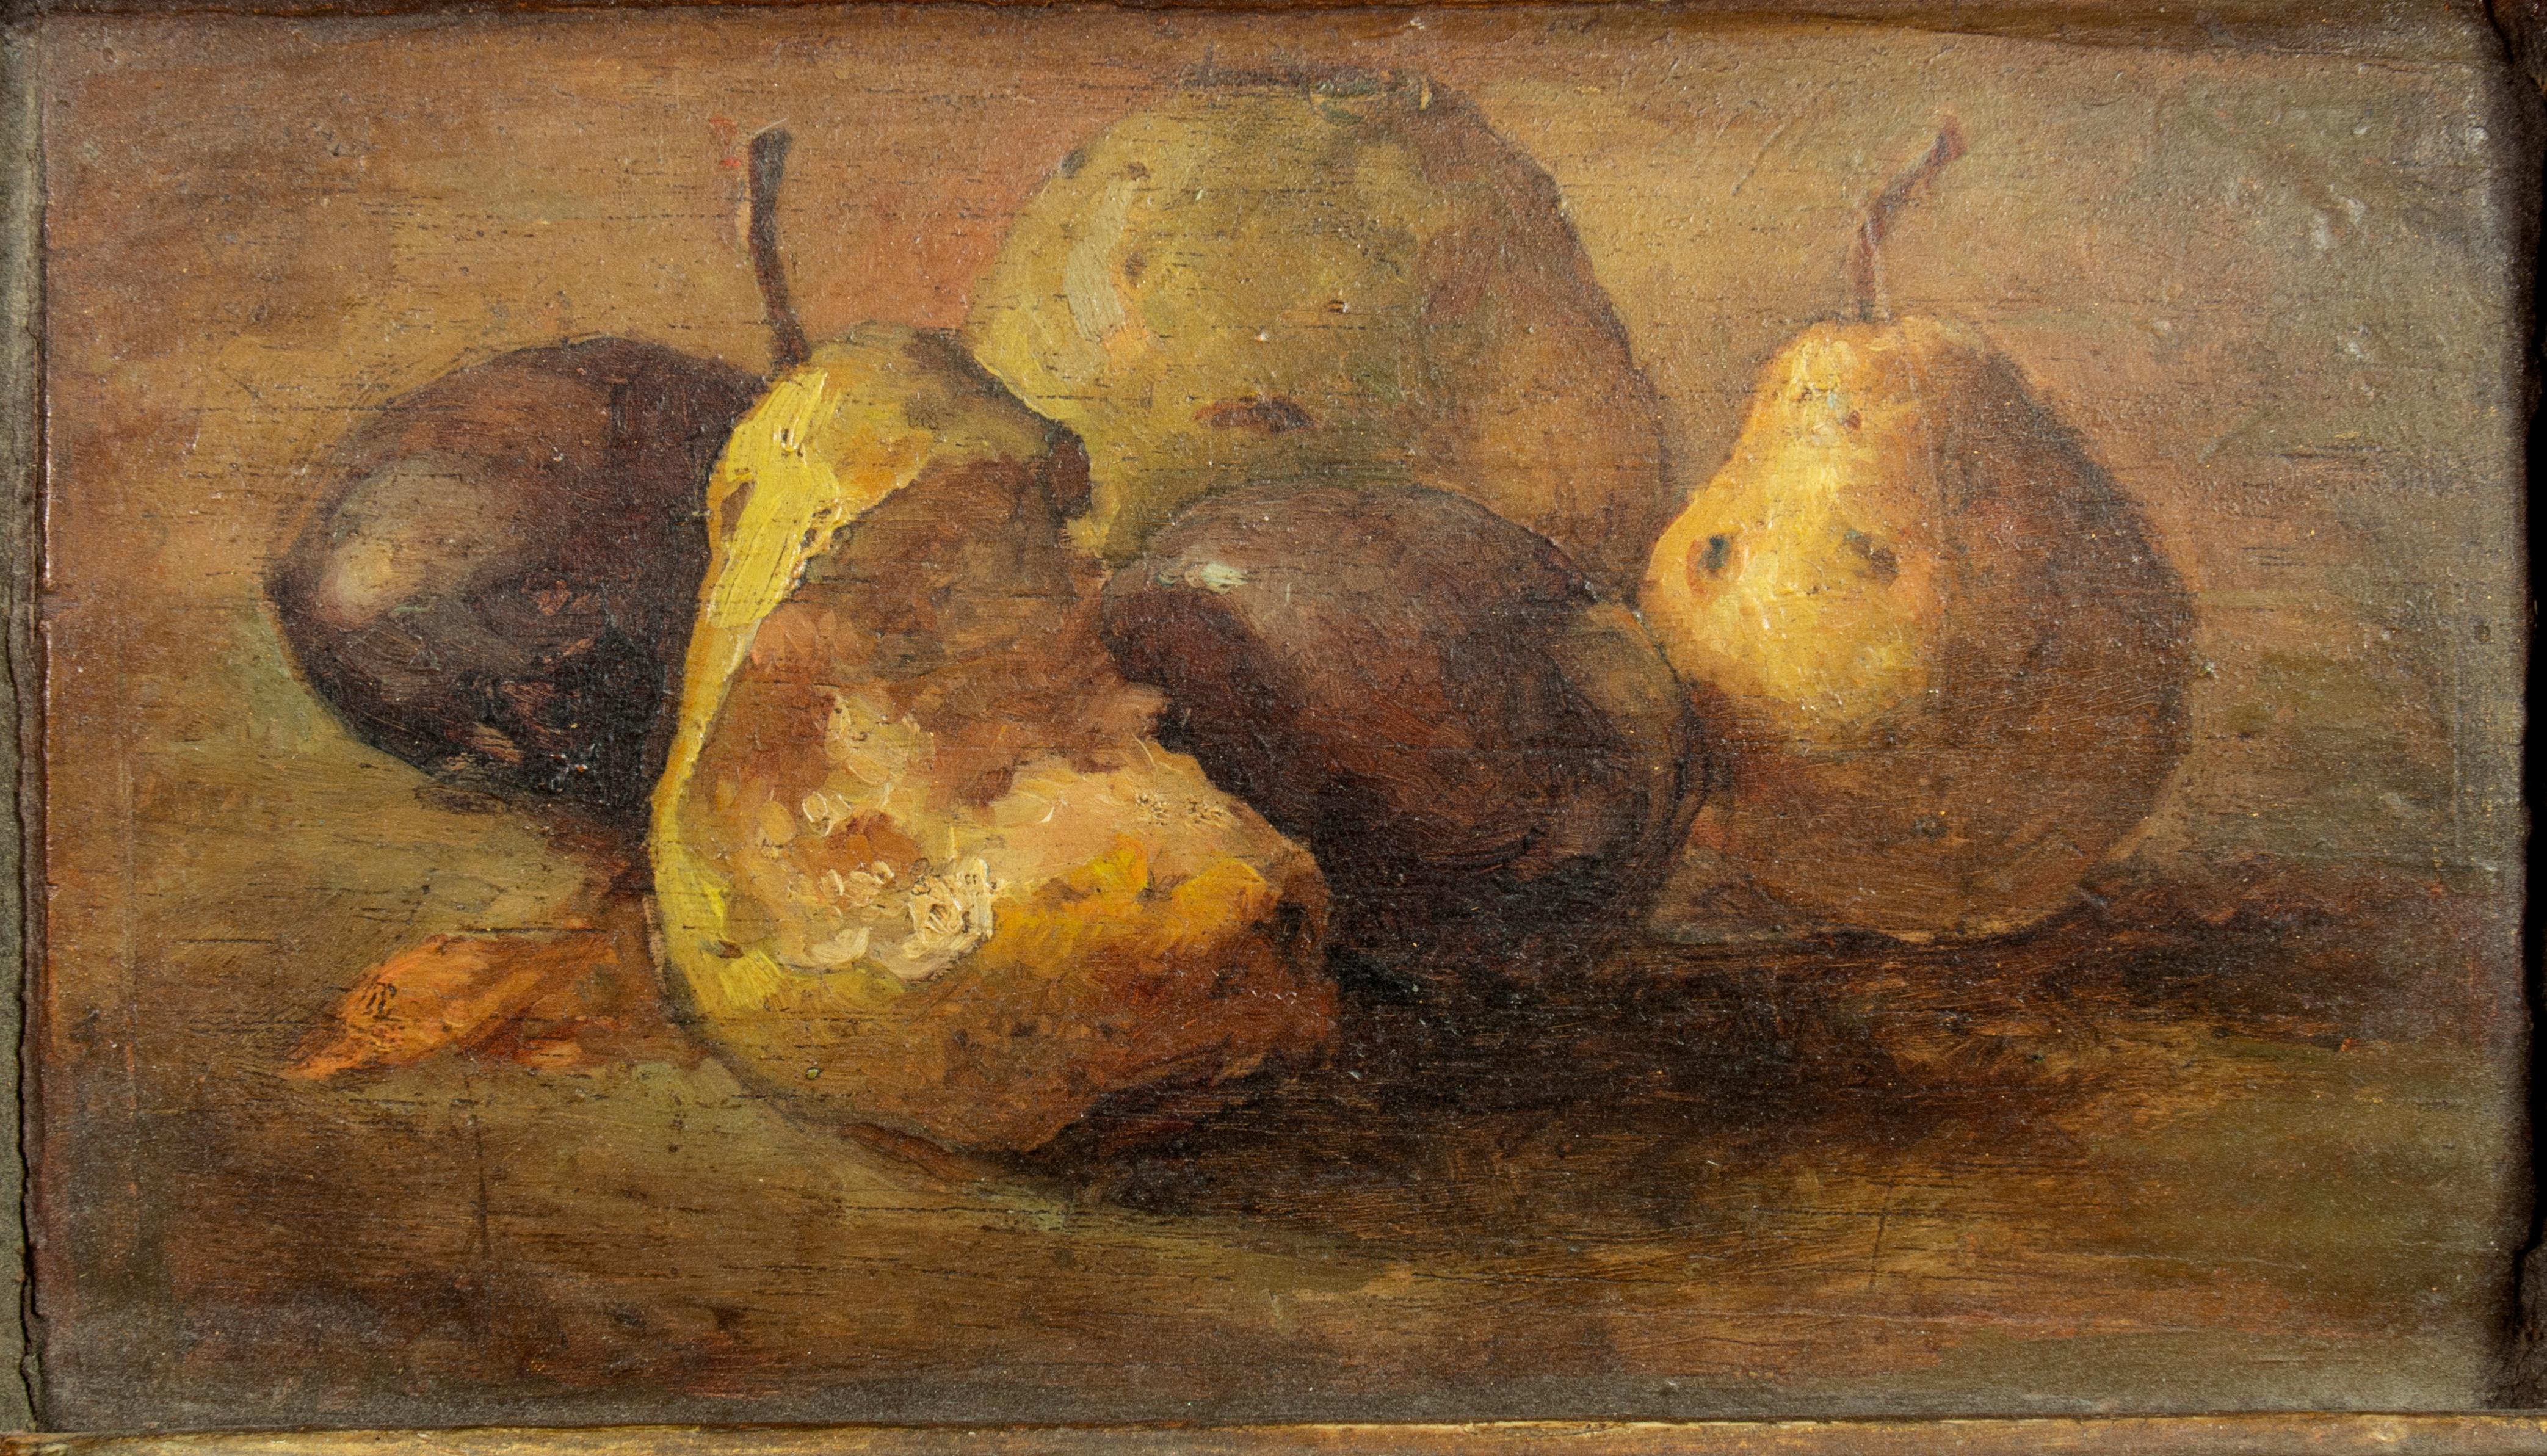 In a period gilt wood frame. Painting on wood panel of plums and pears.